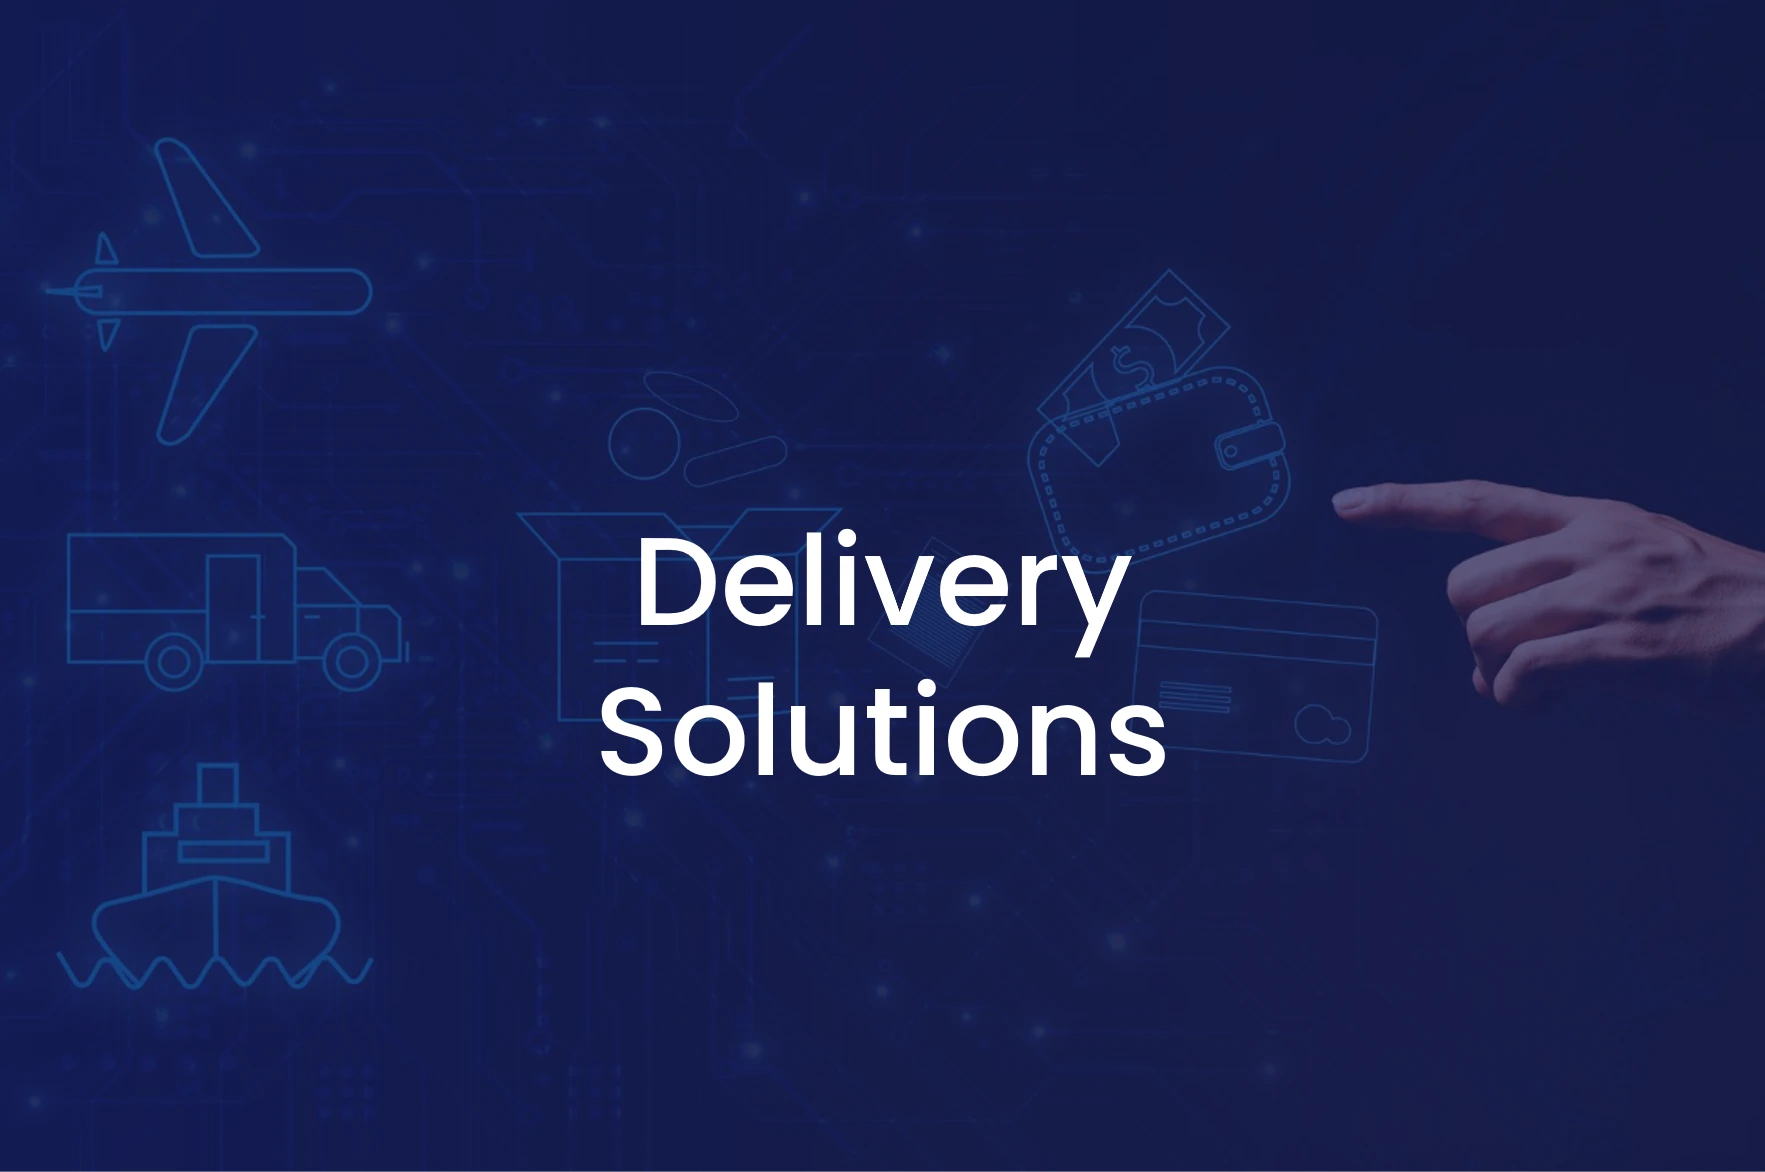 Delivery solutions